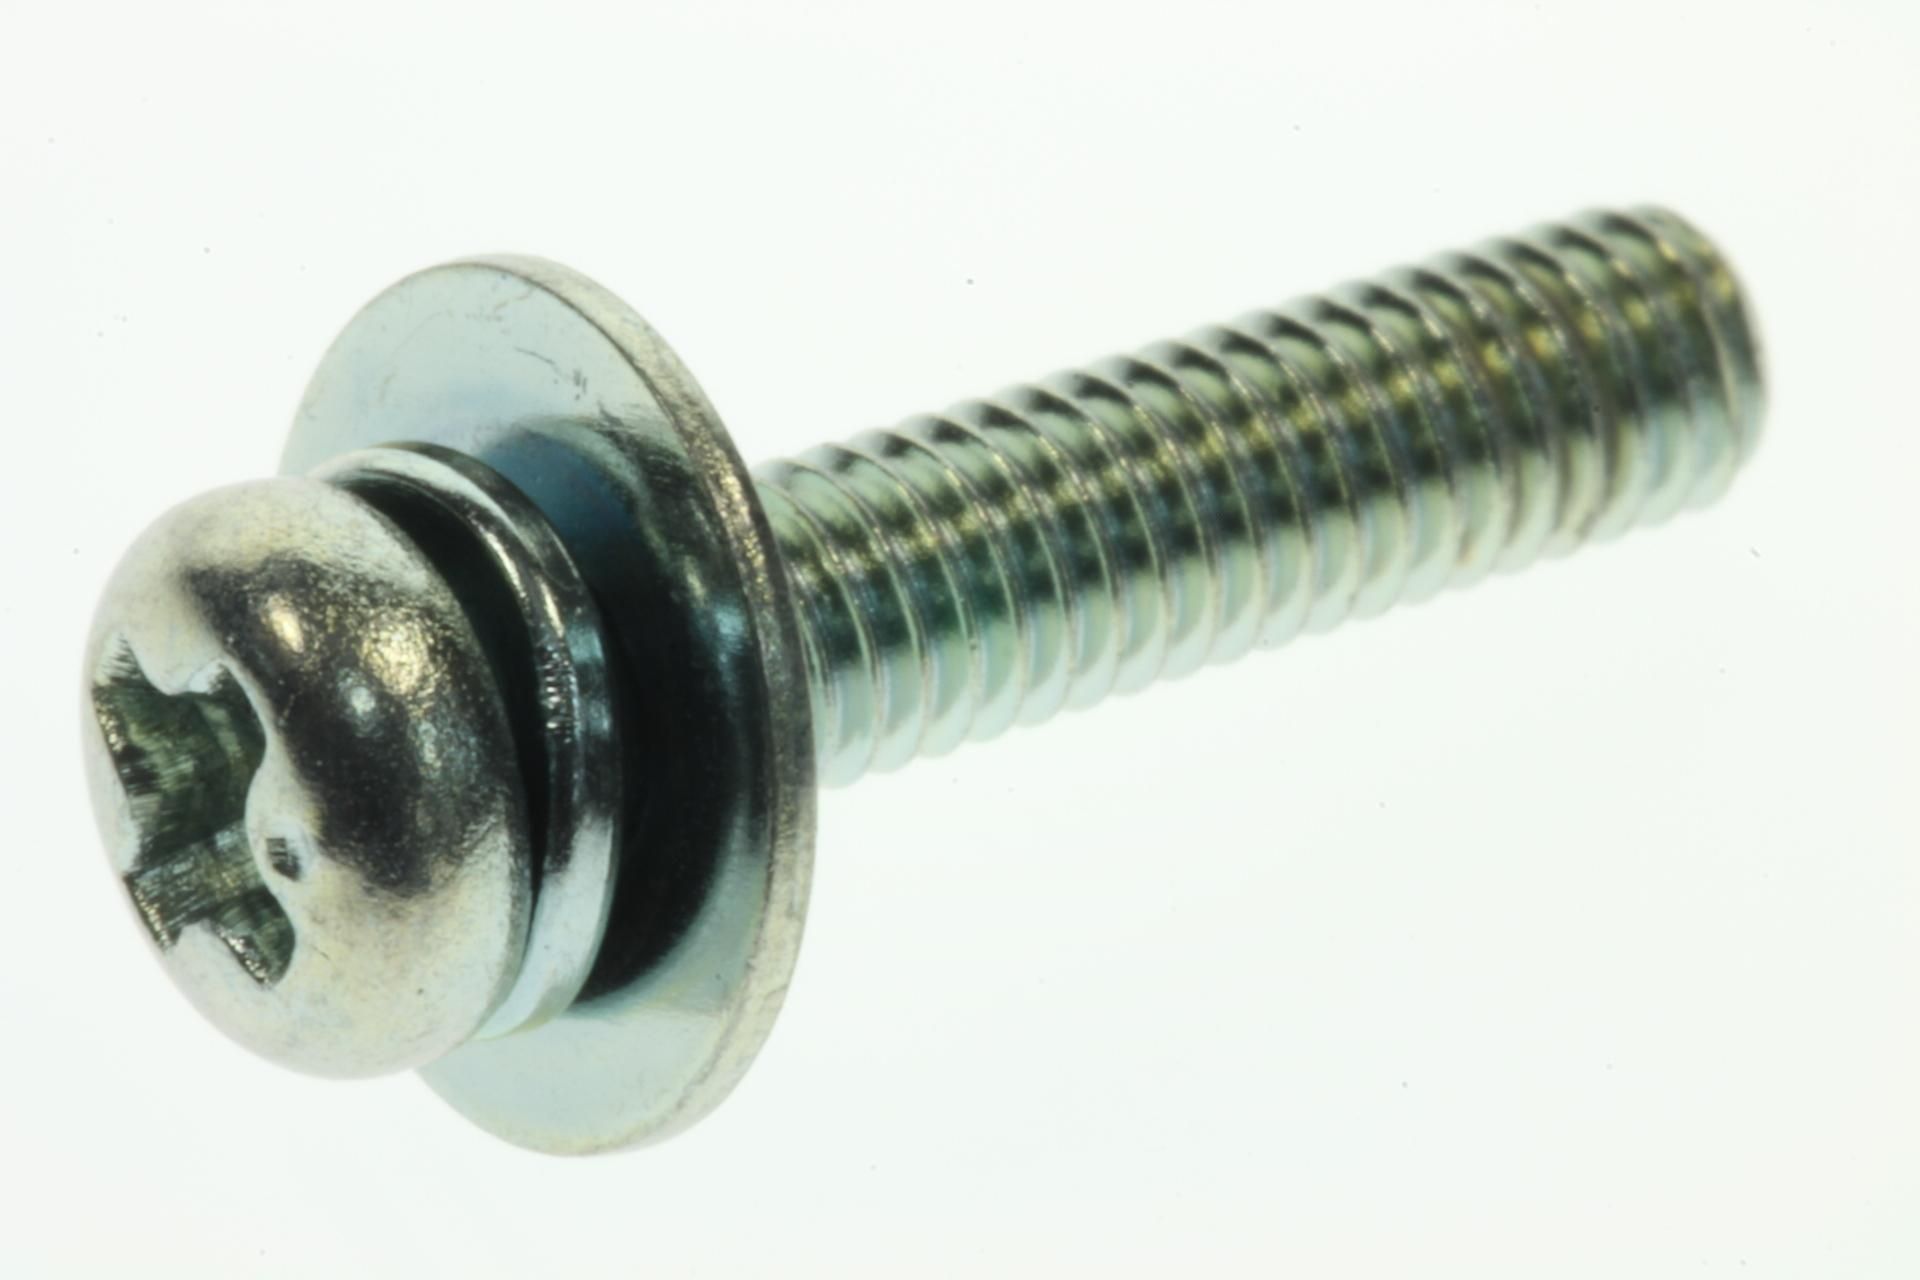 09125-03105 Superseded by 09125-03105-XC0 - SCREW